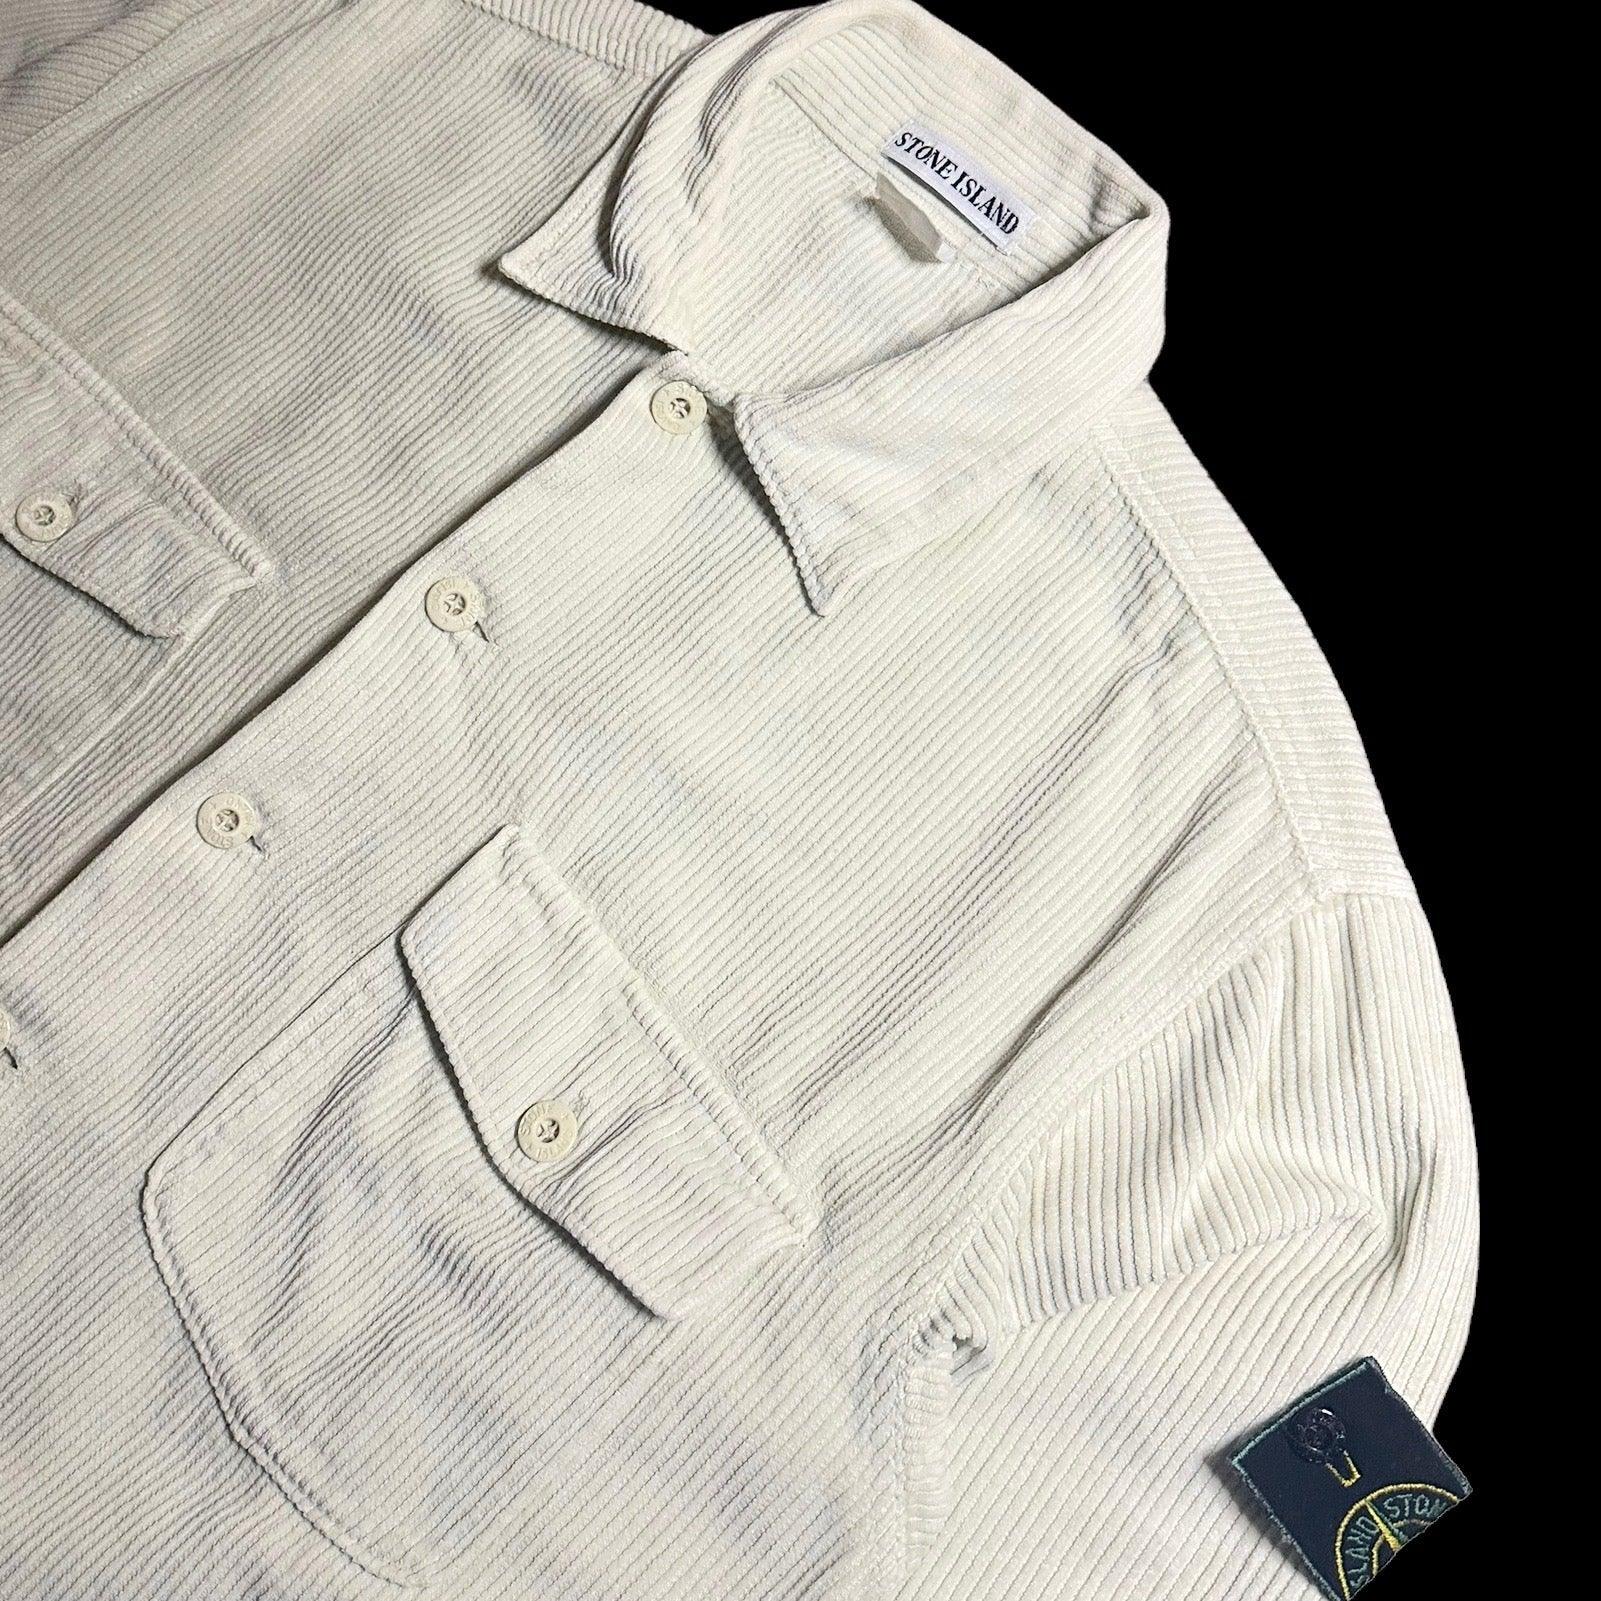 Stone Island Jumbo Corduroy Button Up Shirt from A/W 1994 - Known Source